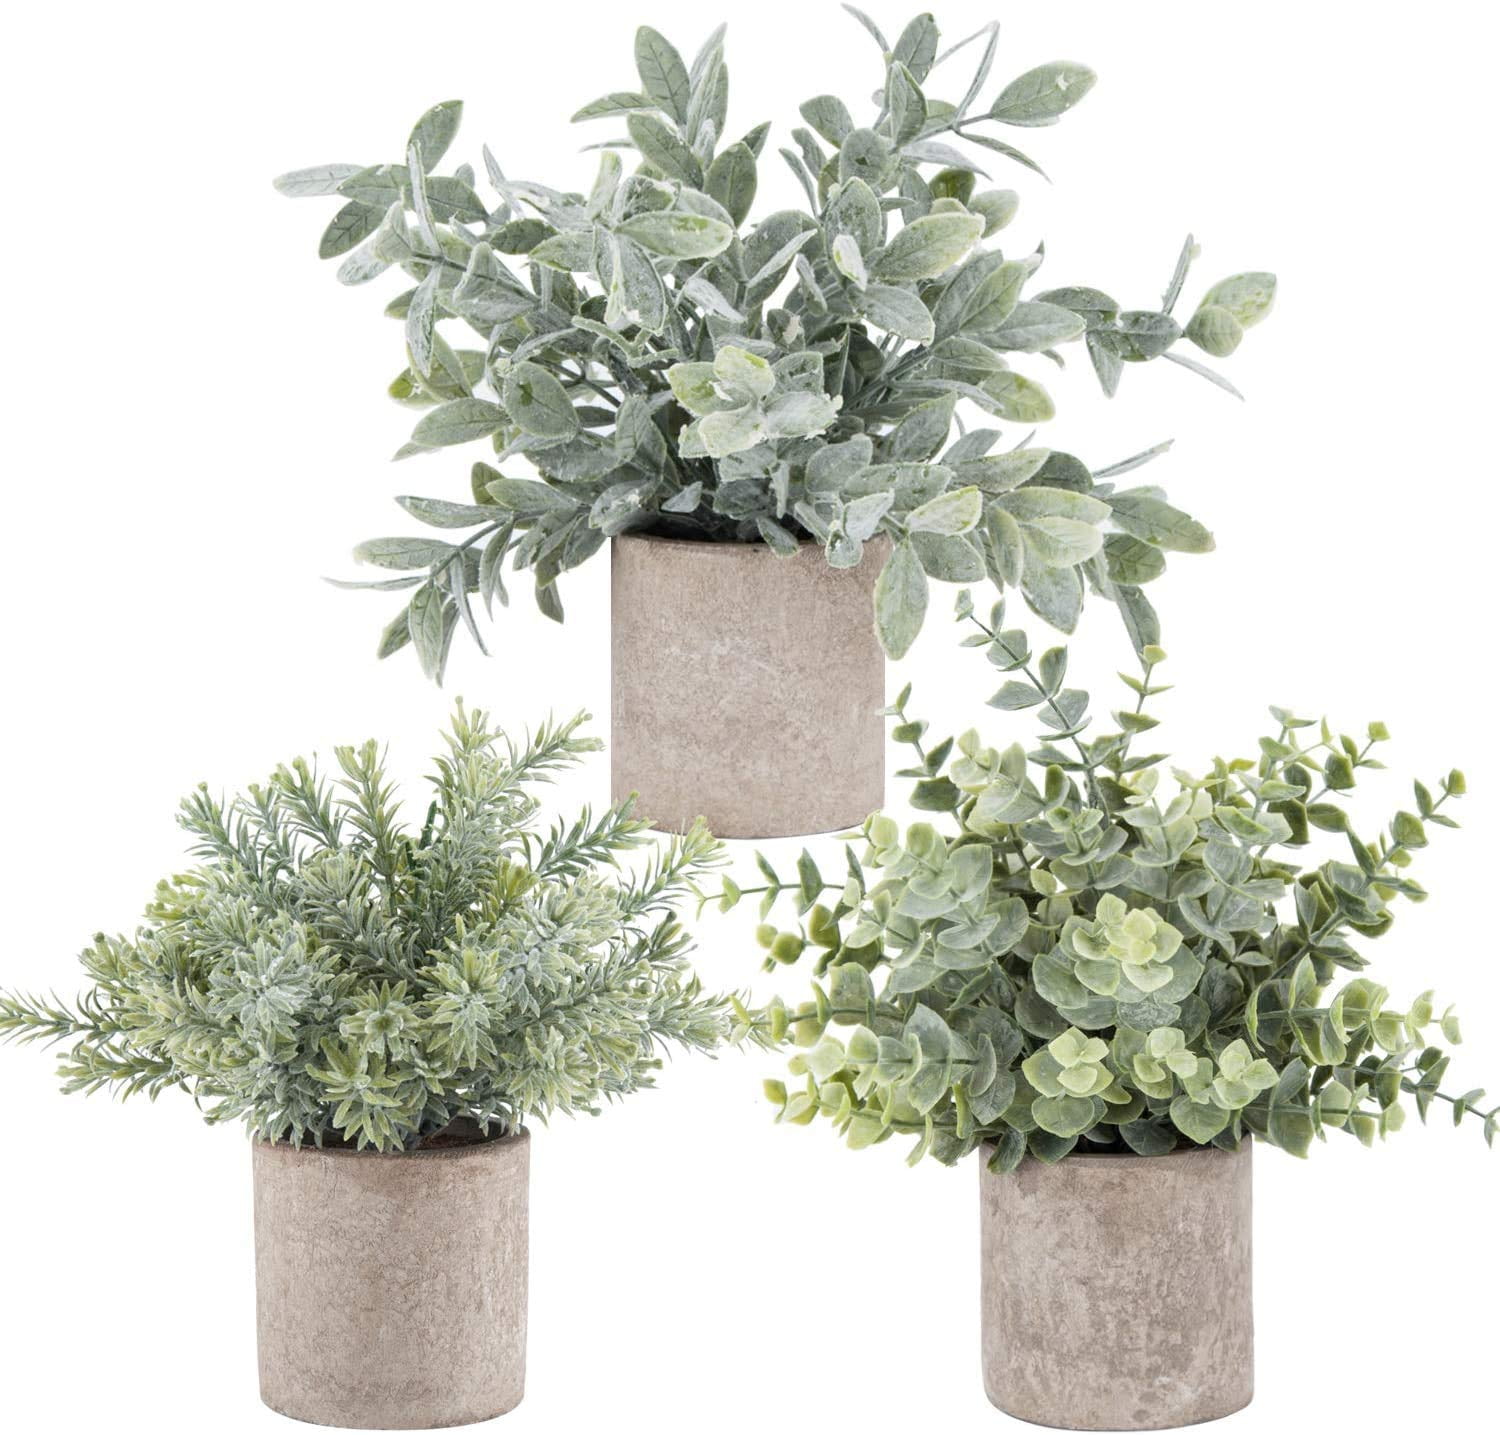 Der Rose 2 Packs Small Fake Plants Mini Artificial Potted Plants for Table  Desk Home Bathroom Office Decor